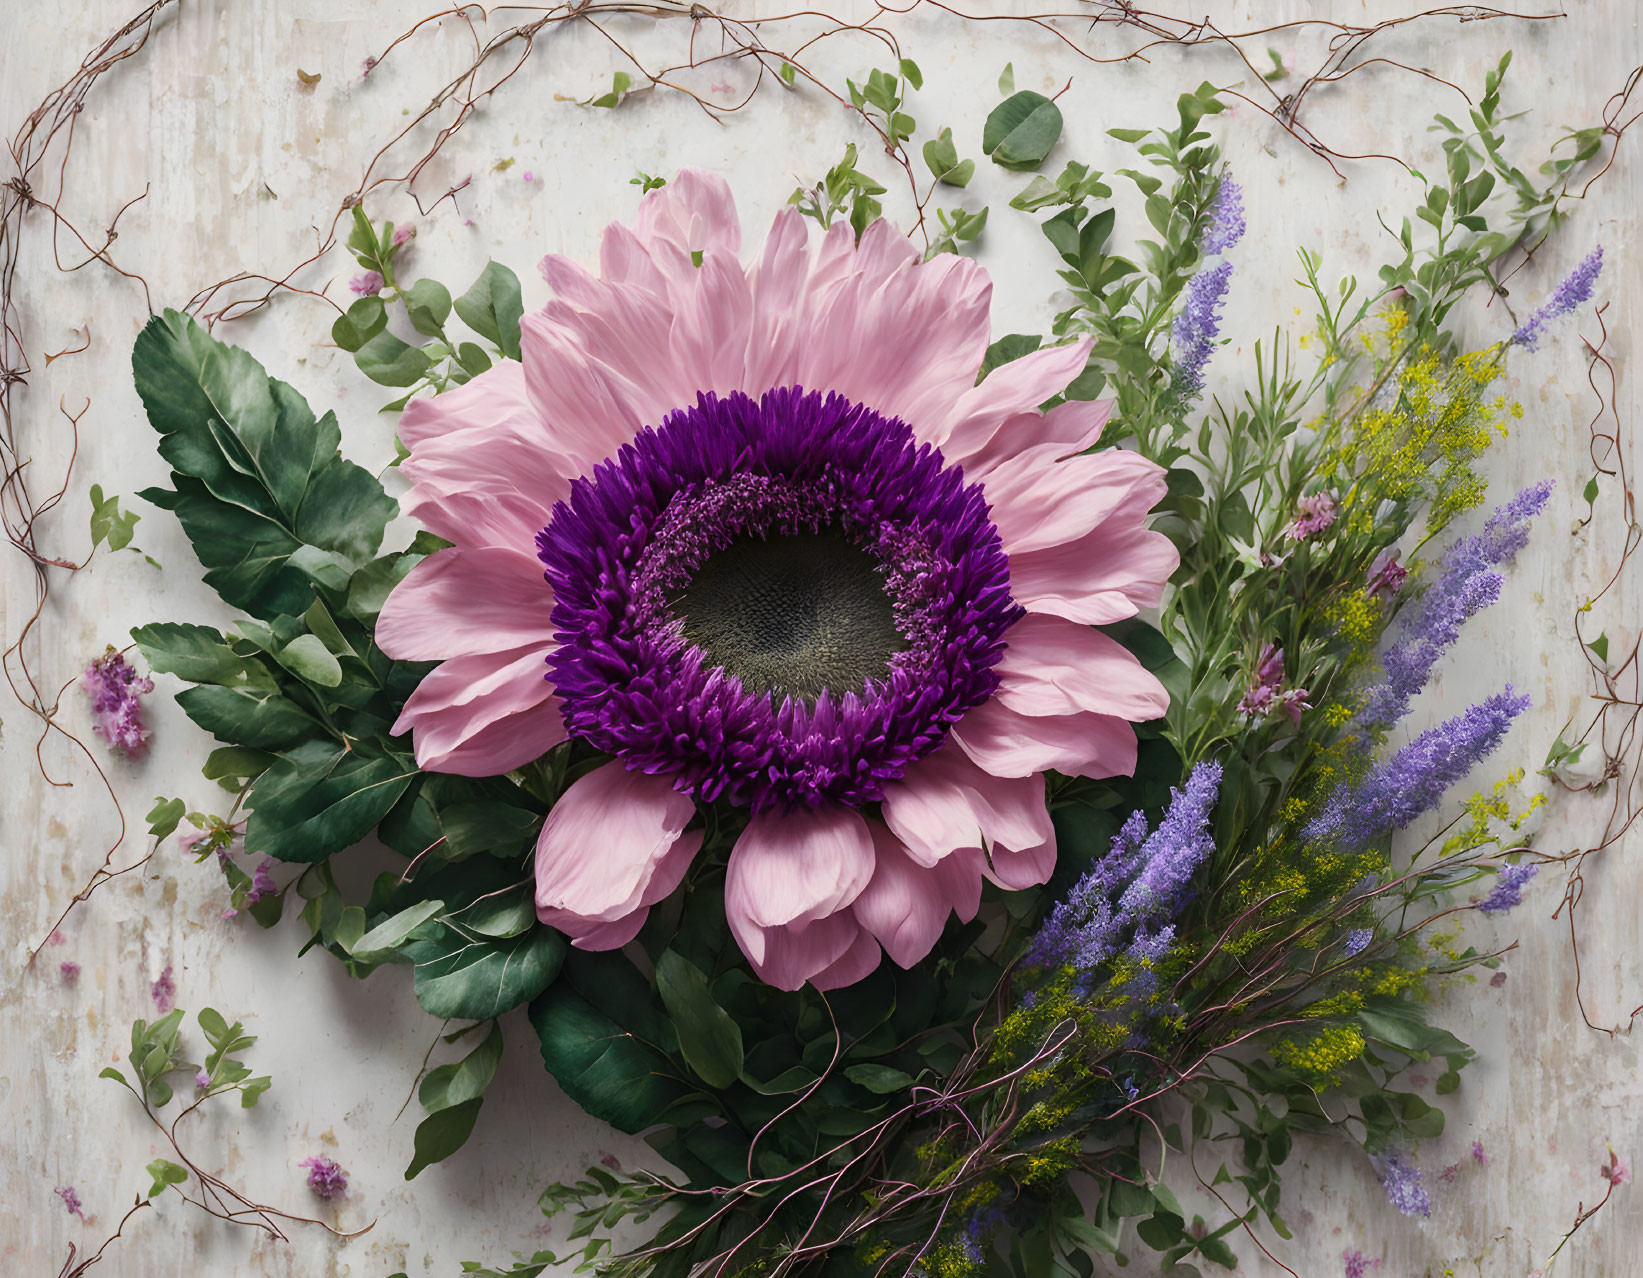 Pink Gerbera Daisy with Green Leaves and Purple Flowers on White Surface